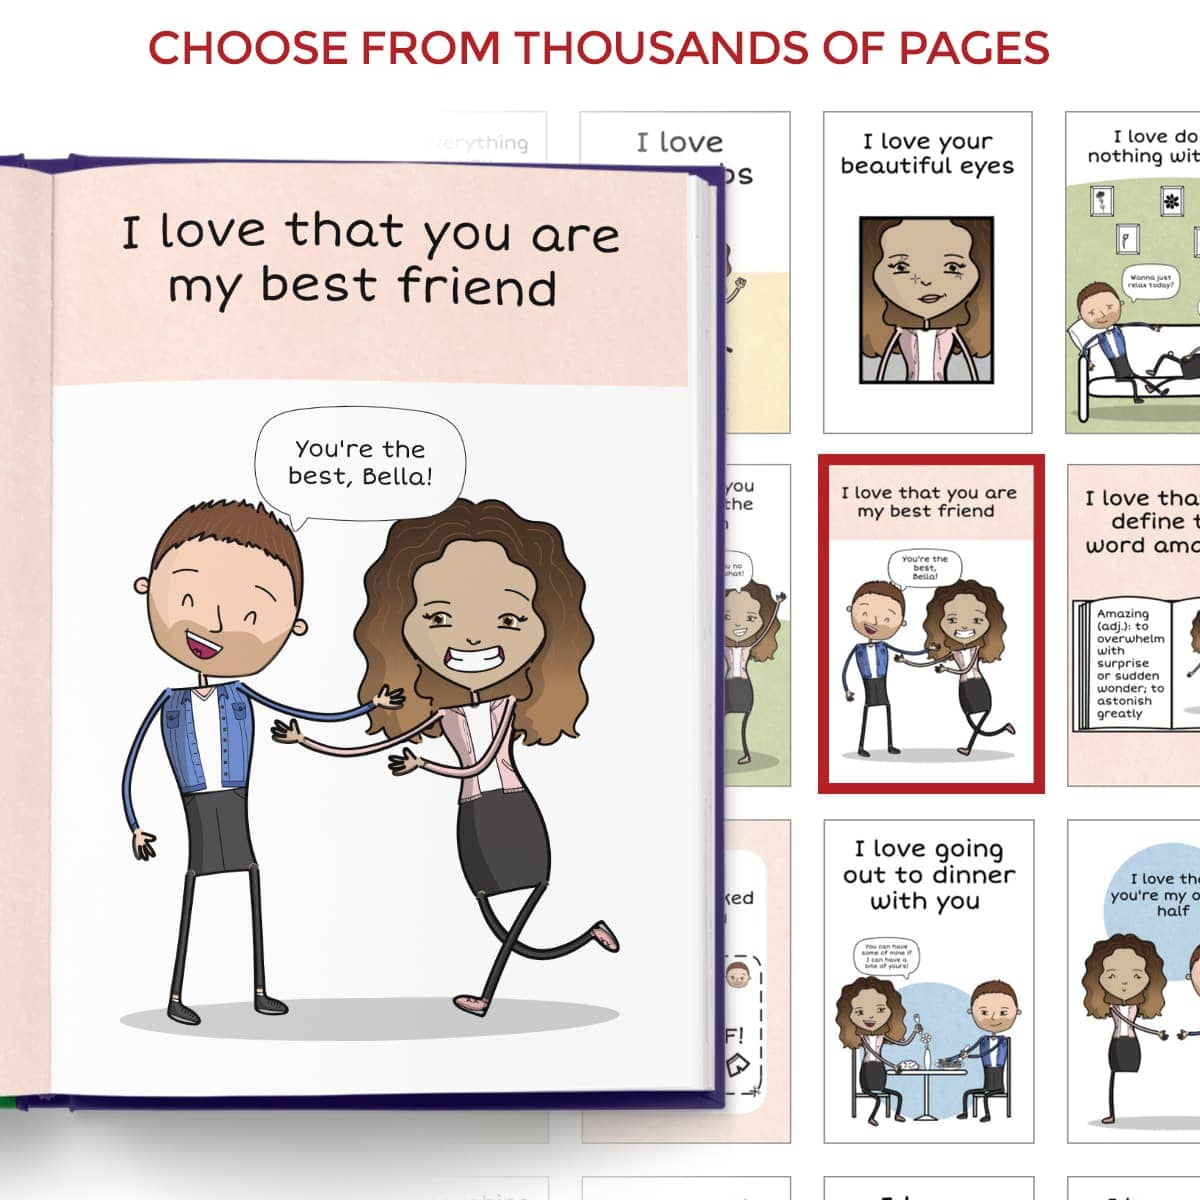 Wedding Gifts by LoveBook | The Personalized Gift Book That Says Why You Love Someone | LoveBook Online - 2